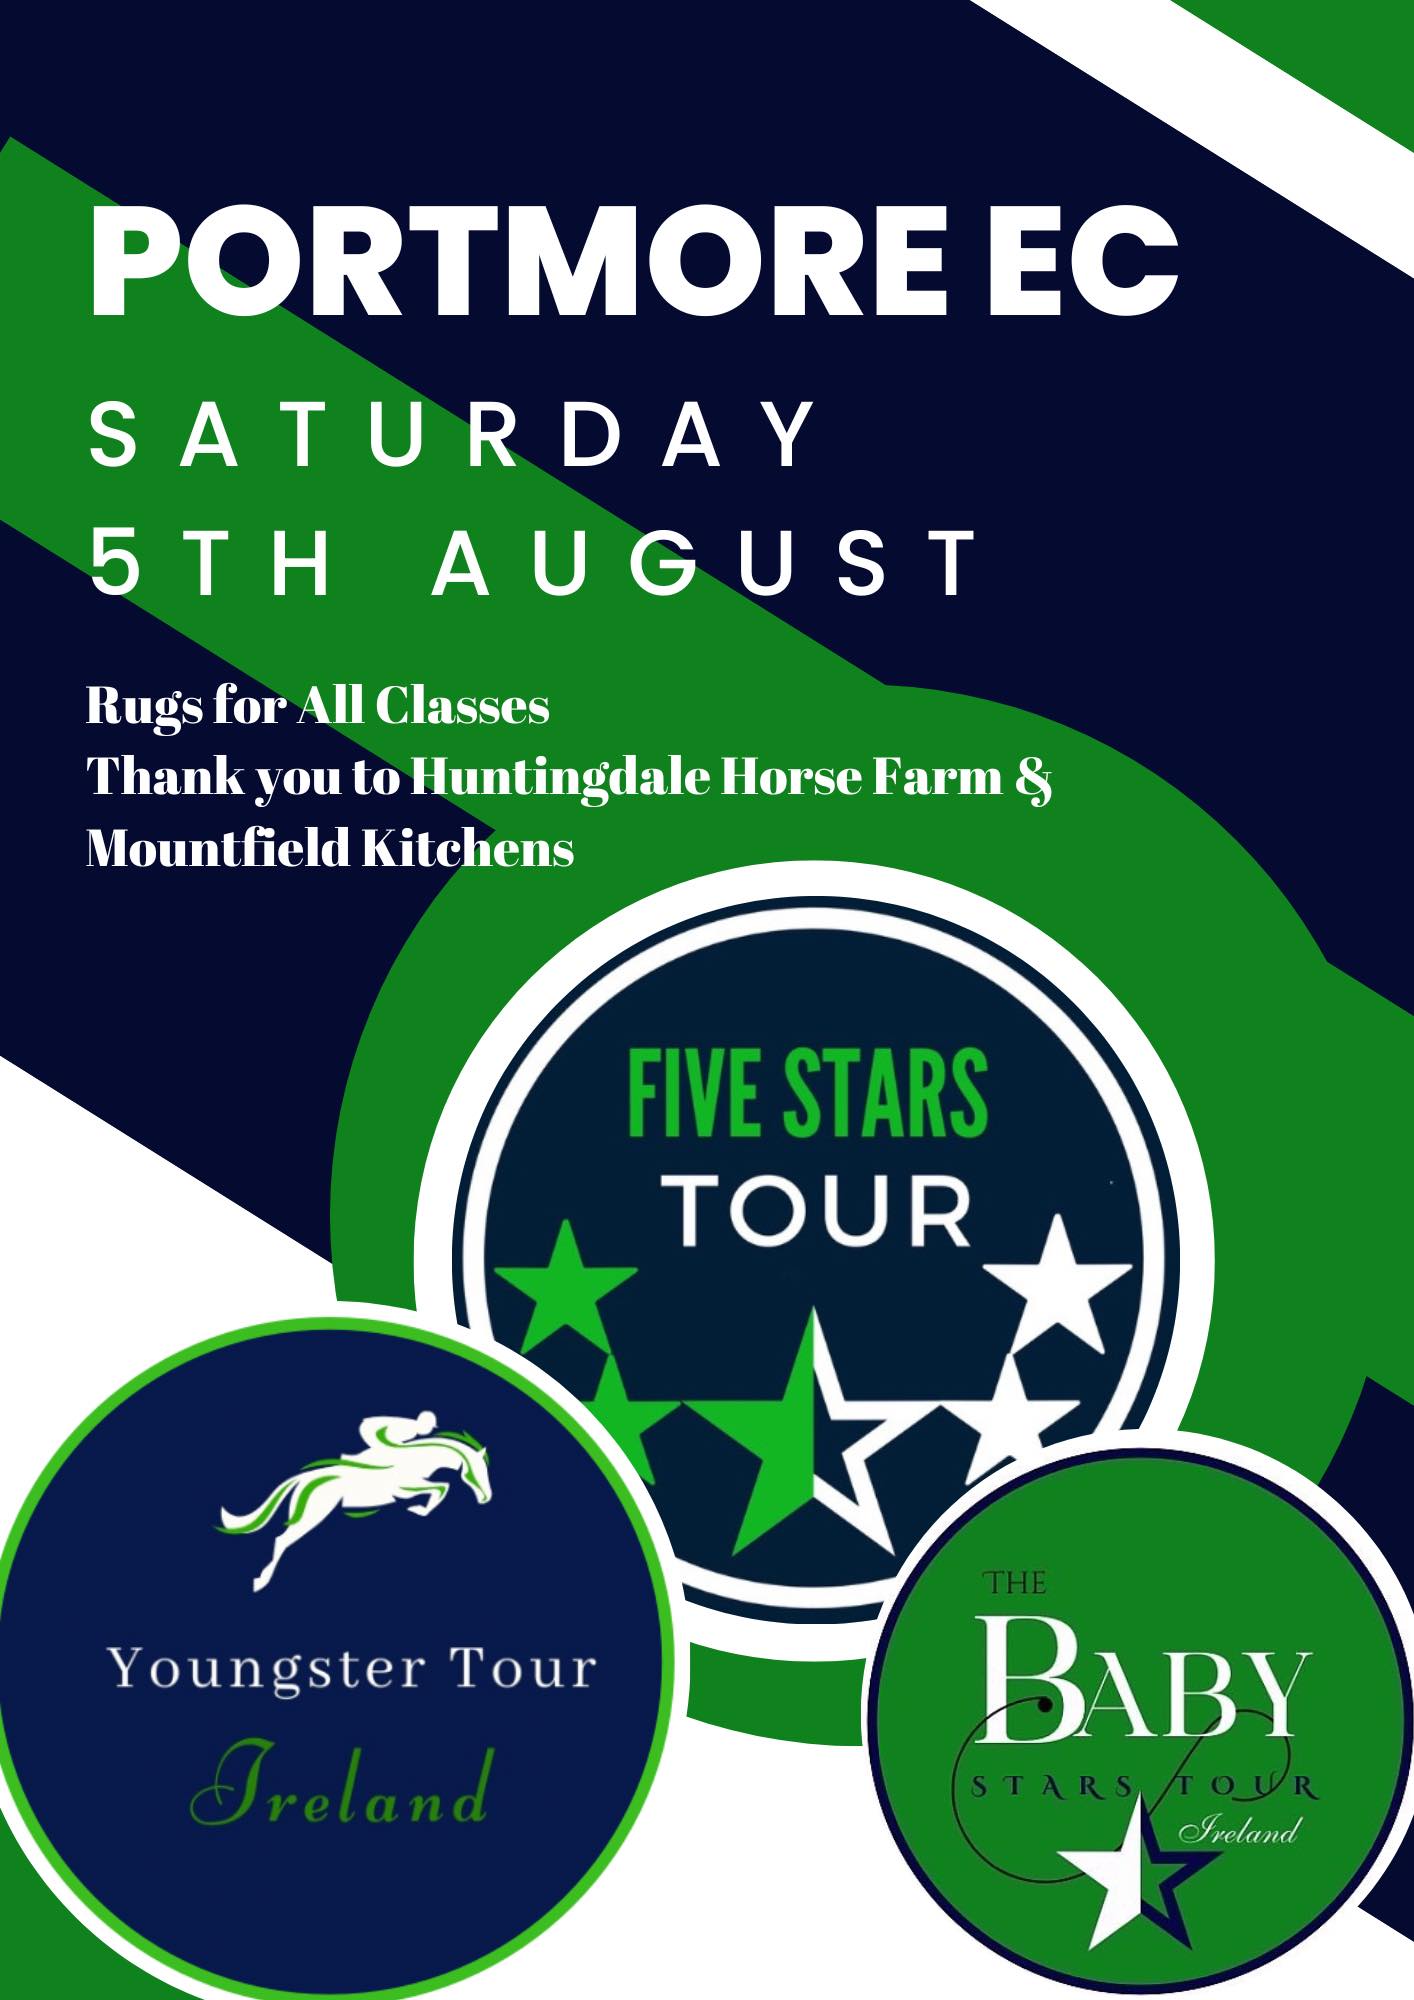 Portmore Equestrian | Fivestars, Baby Stars & Youngster Tour